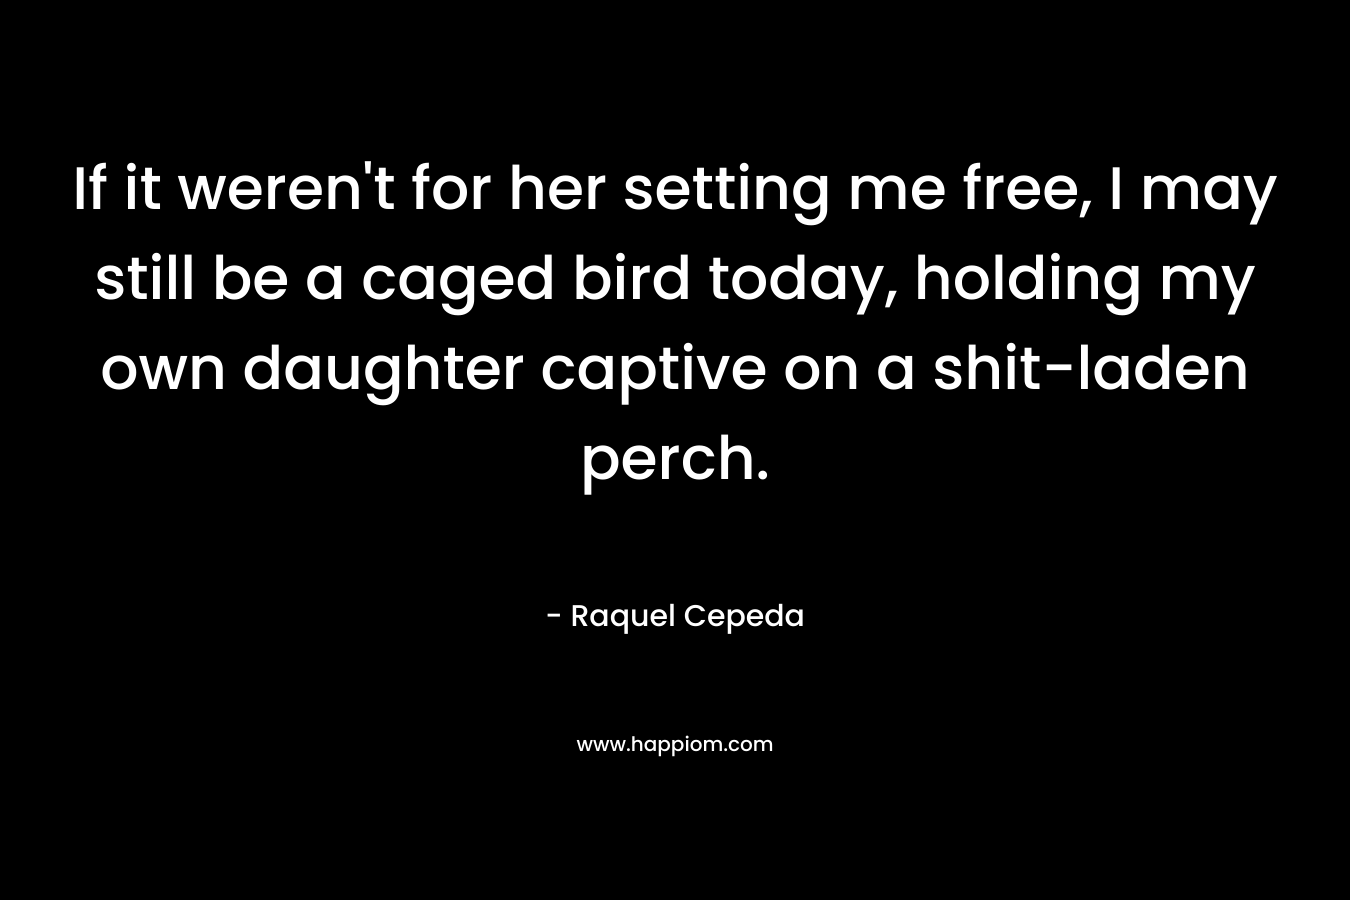 If it weren't for her setting me free, I may still be a caged bird today, holding my own daughter captive on a shit-laden perch.